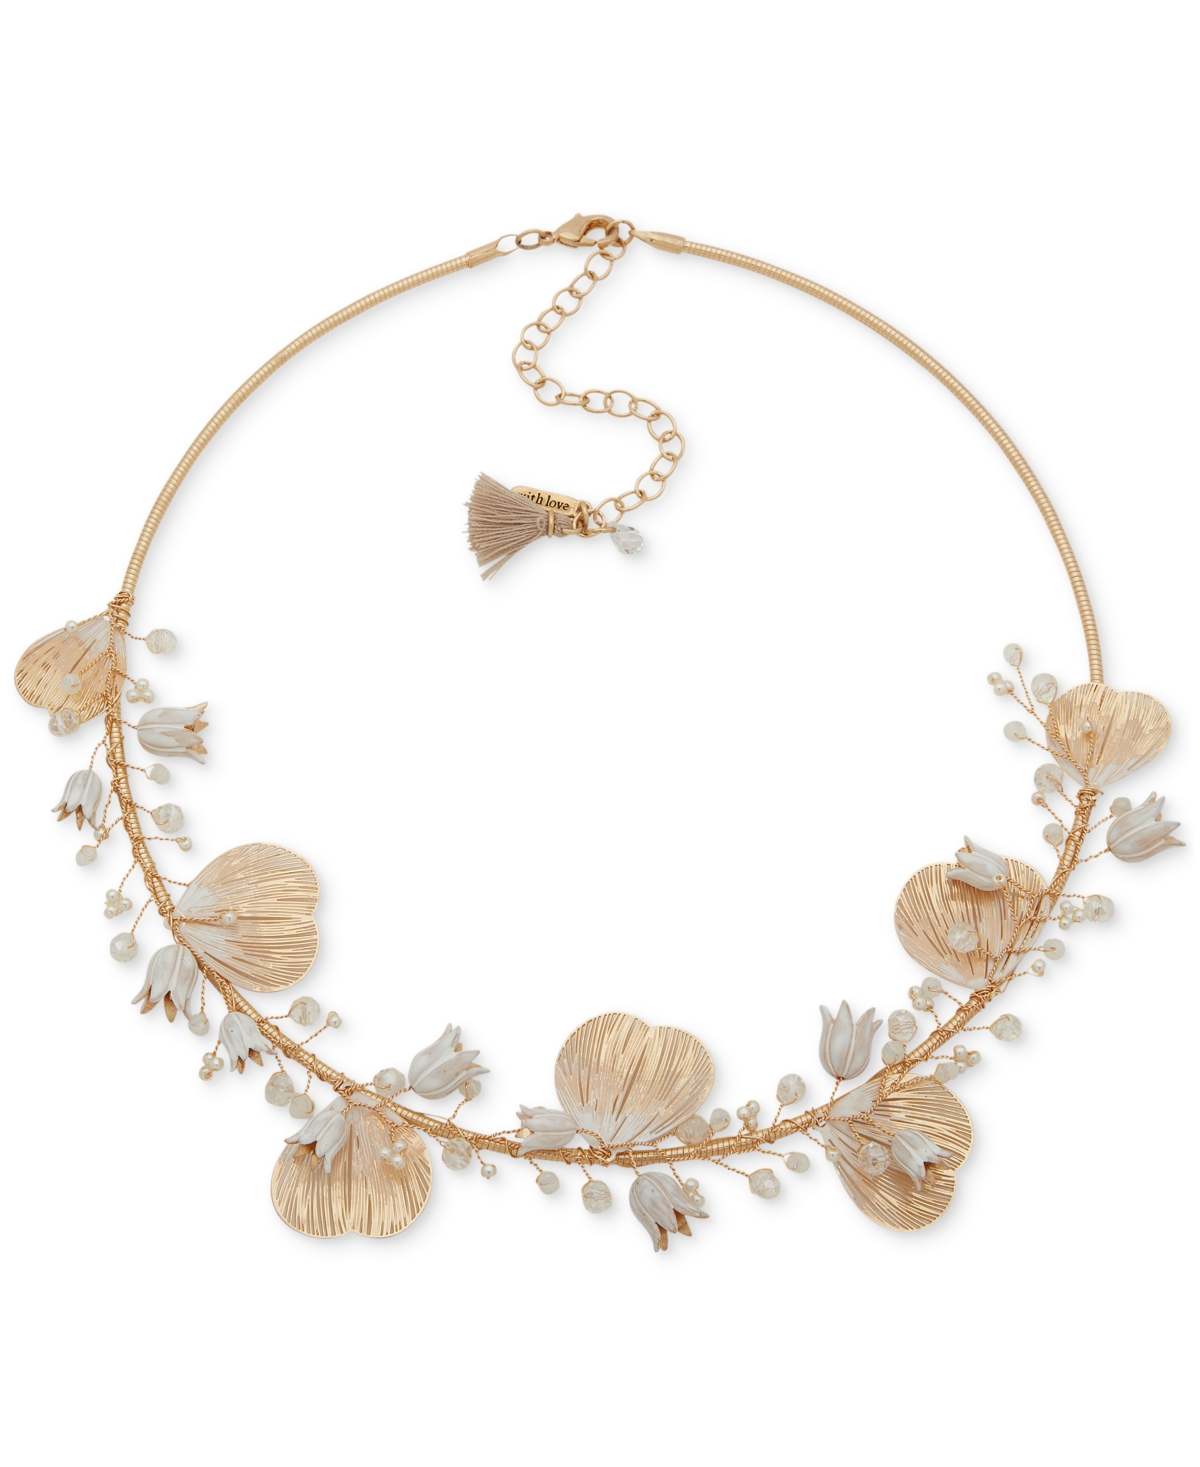 Gold-Tone Bead & Flower Statement Necklace, 16" + 3" extender - White